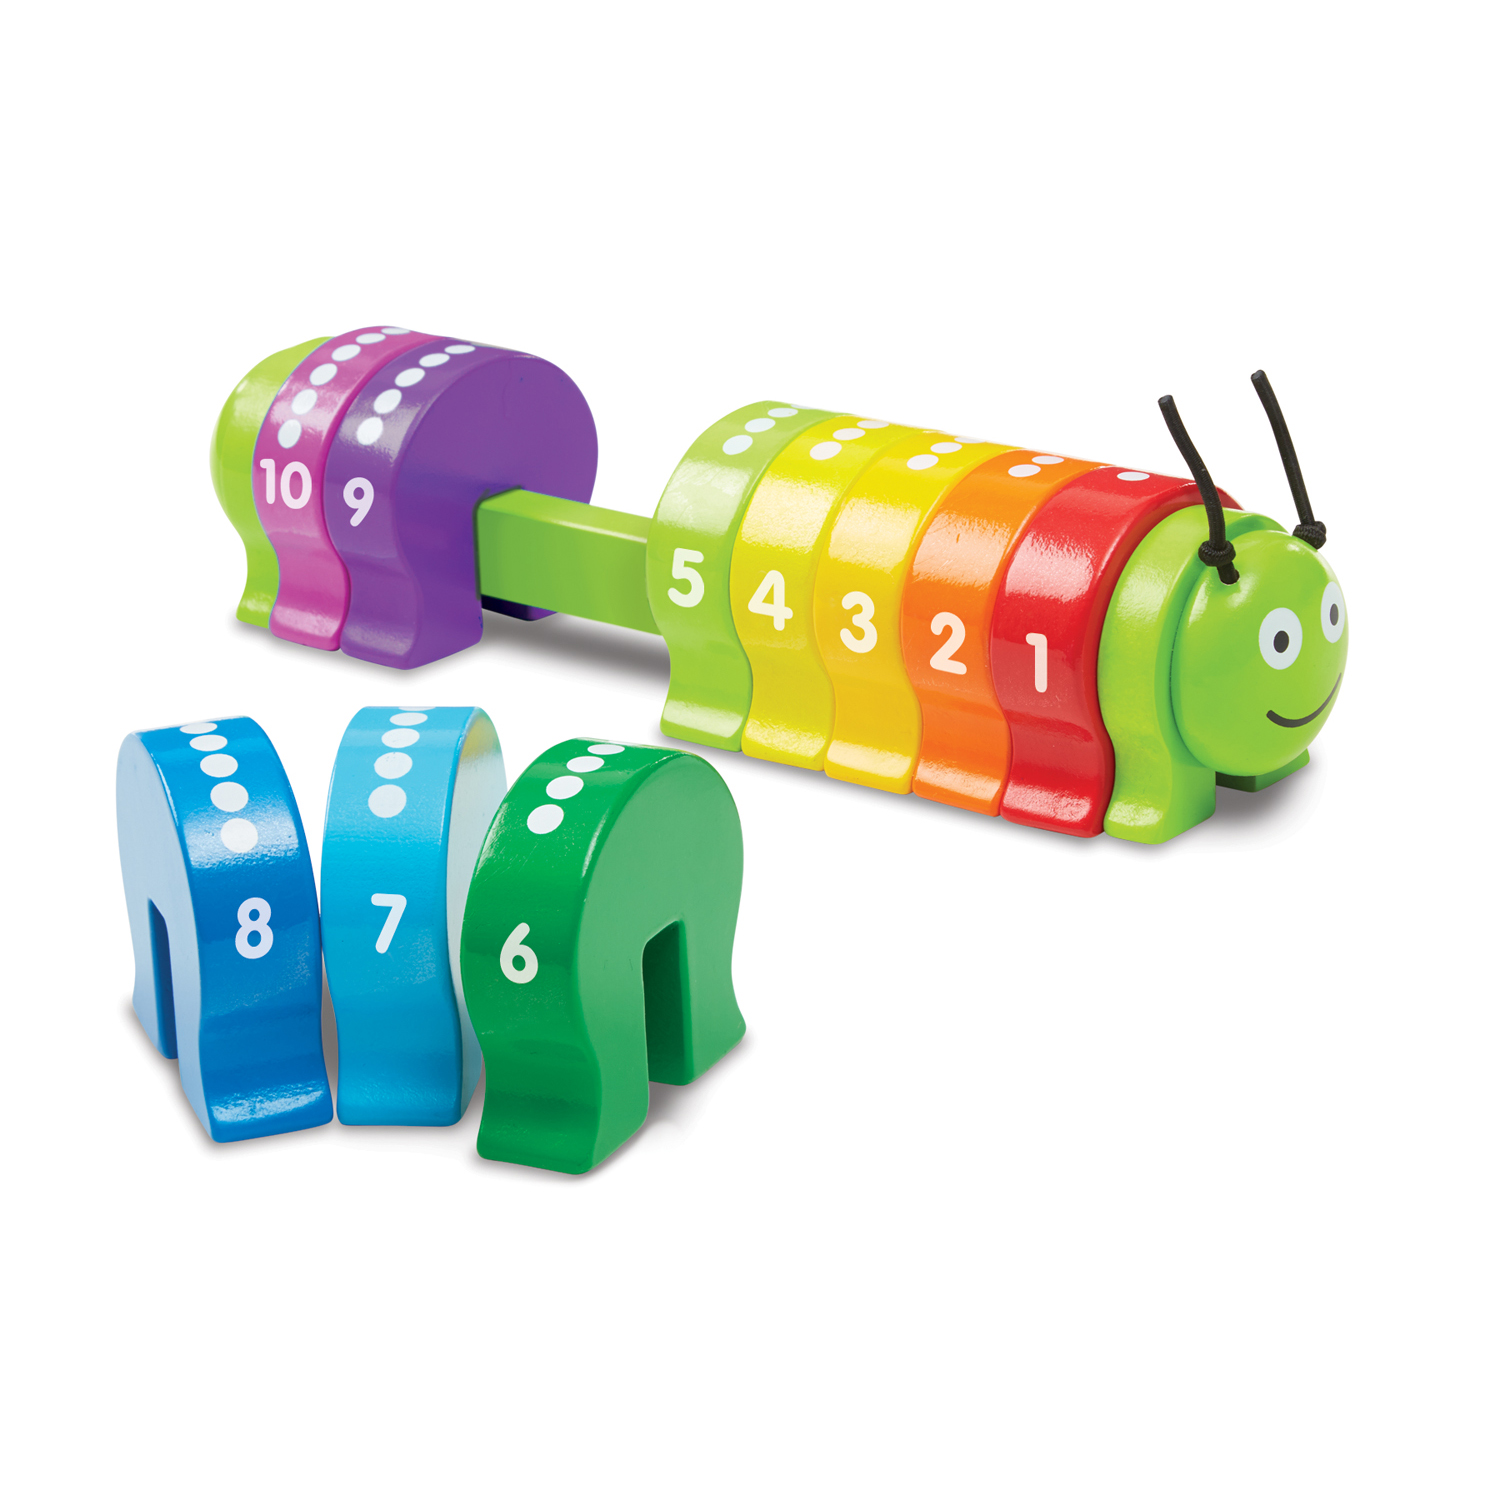 Melissa & Doug Counting Caterpillar image number null